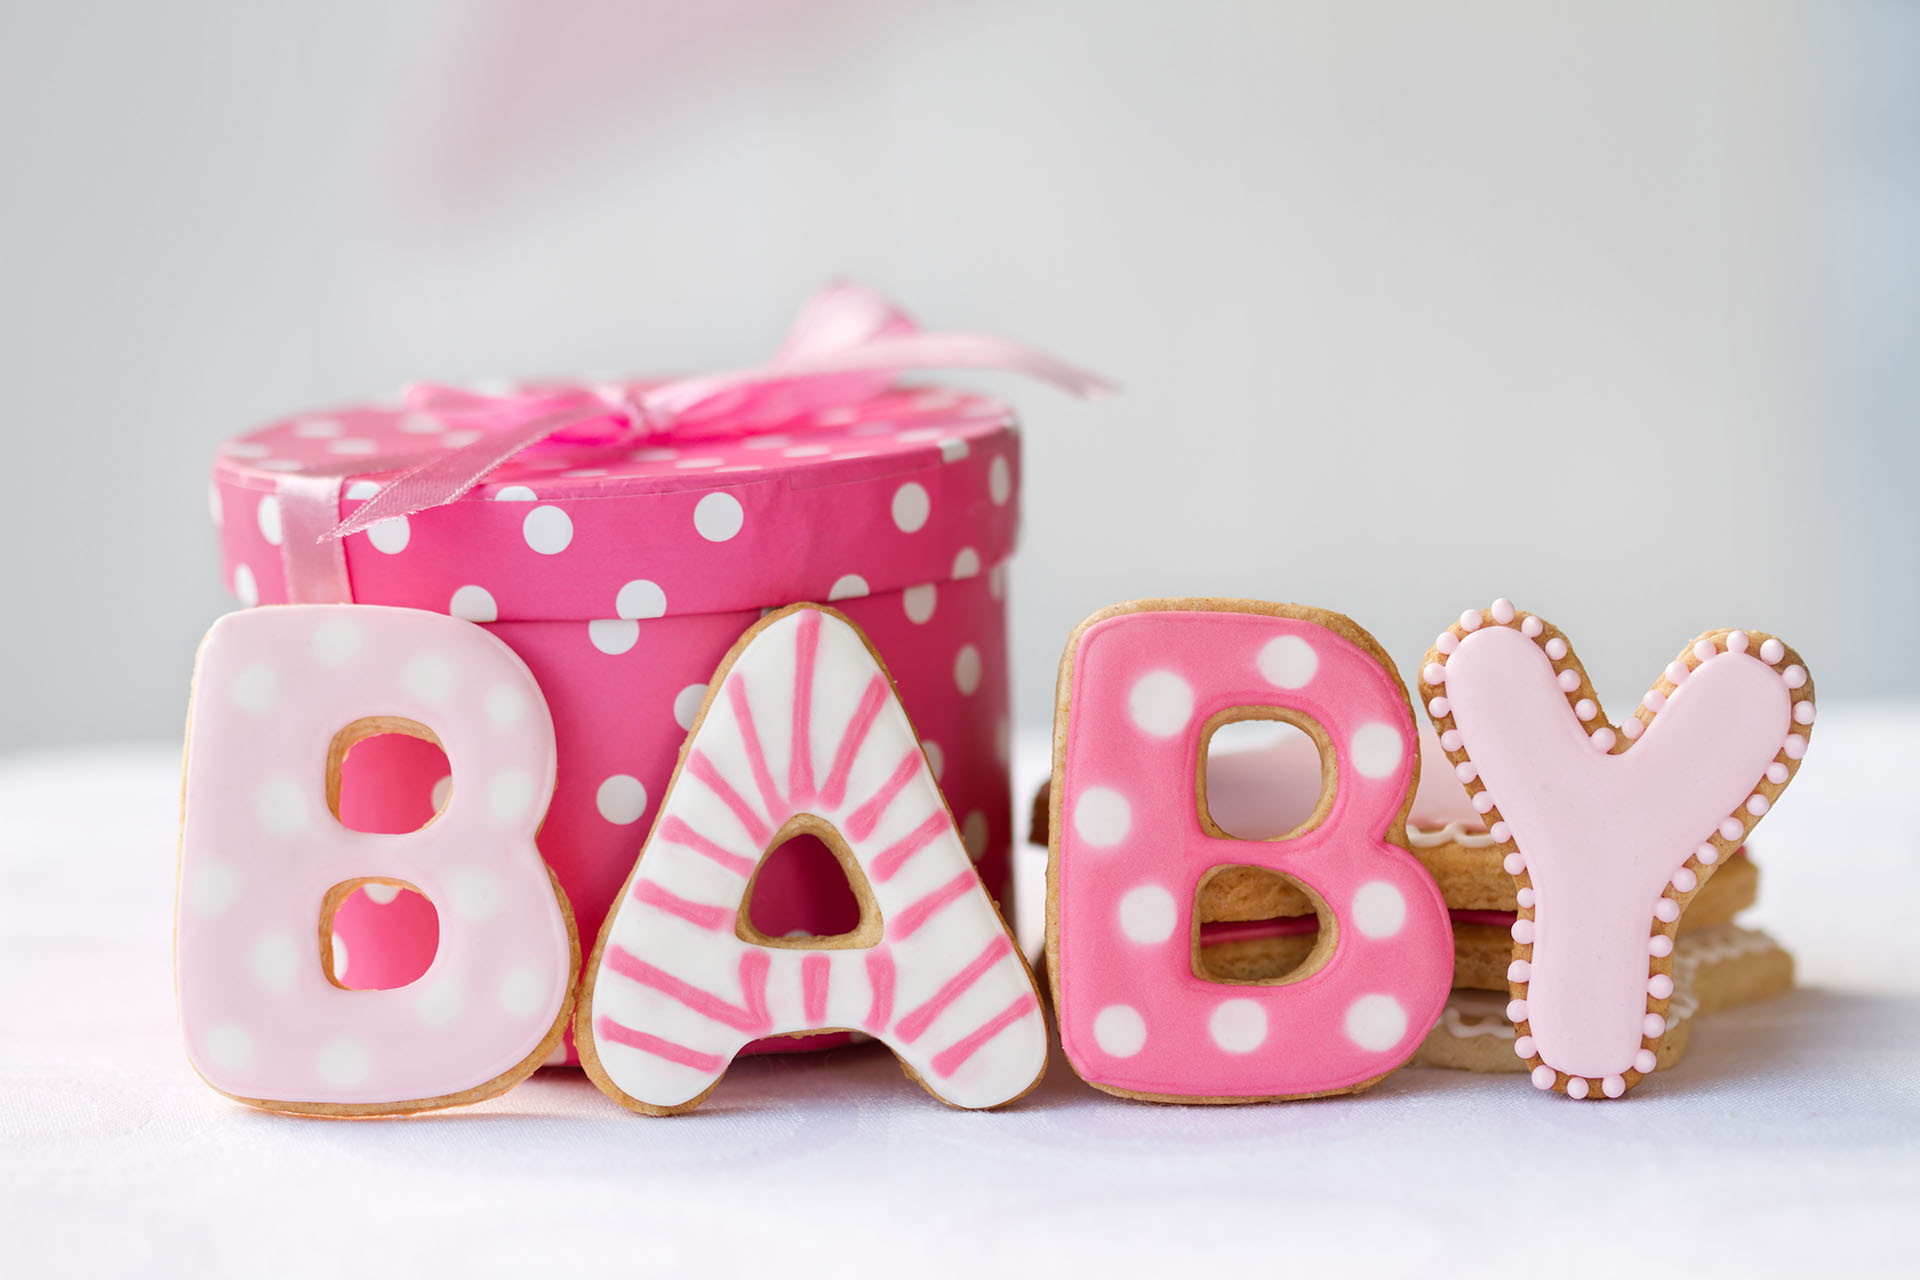 Gift Ideas For Gender Reveal Party
 Top 5 Gender Reveal Party Gift Ideas